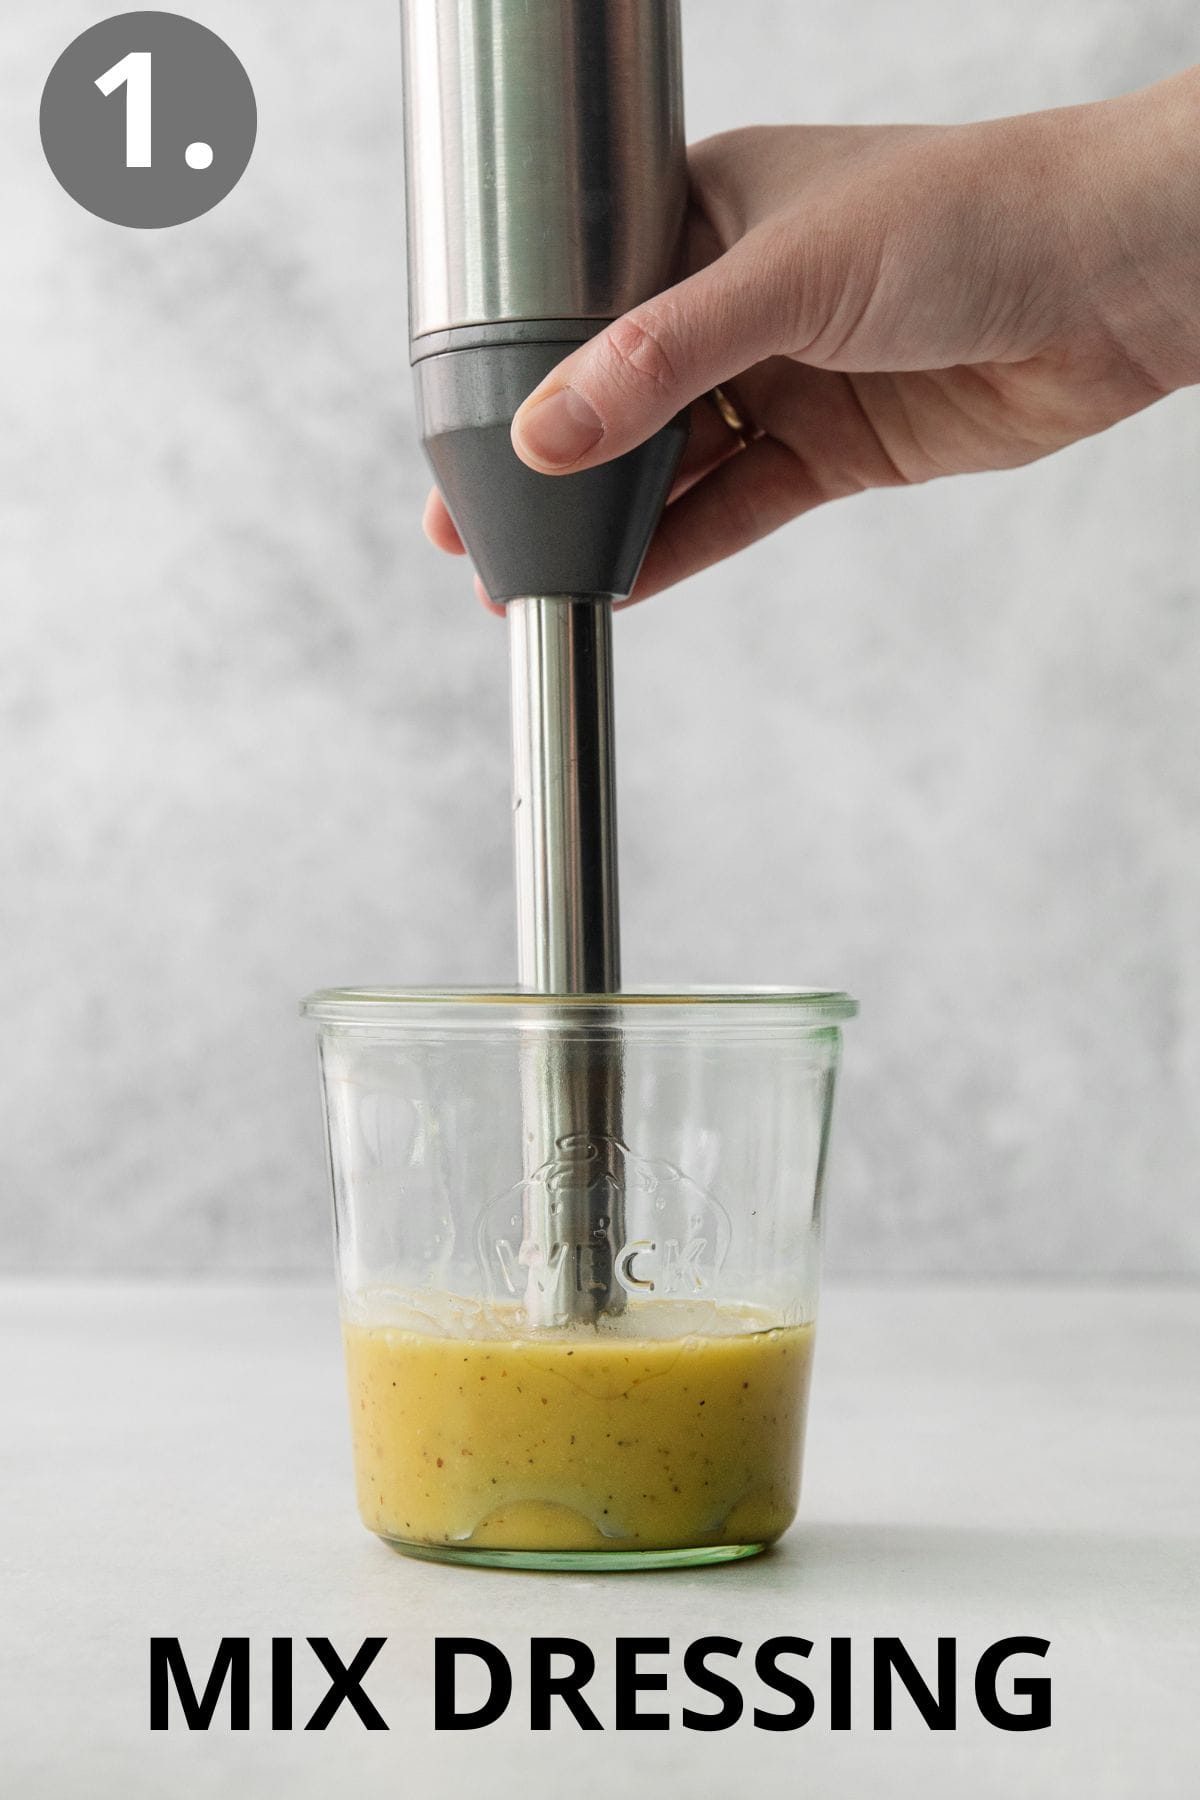 a hand using a hand blender to mix the dressing